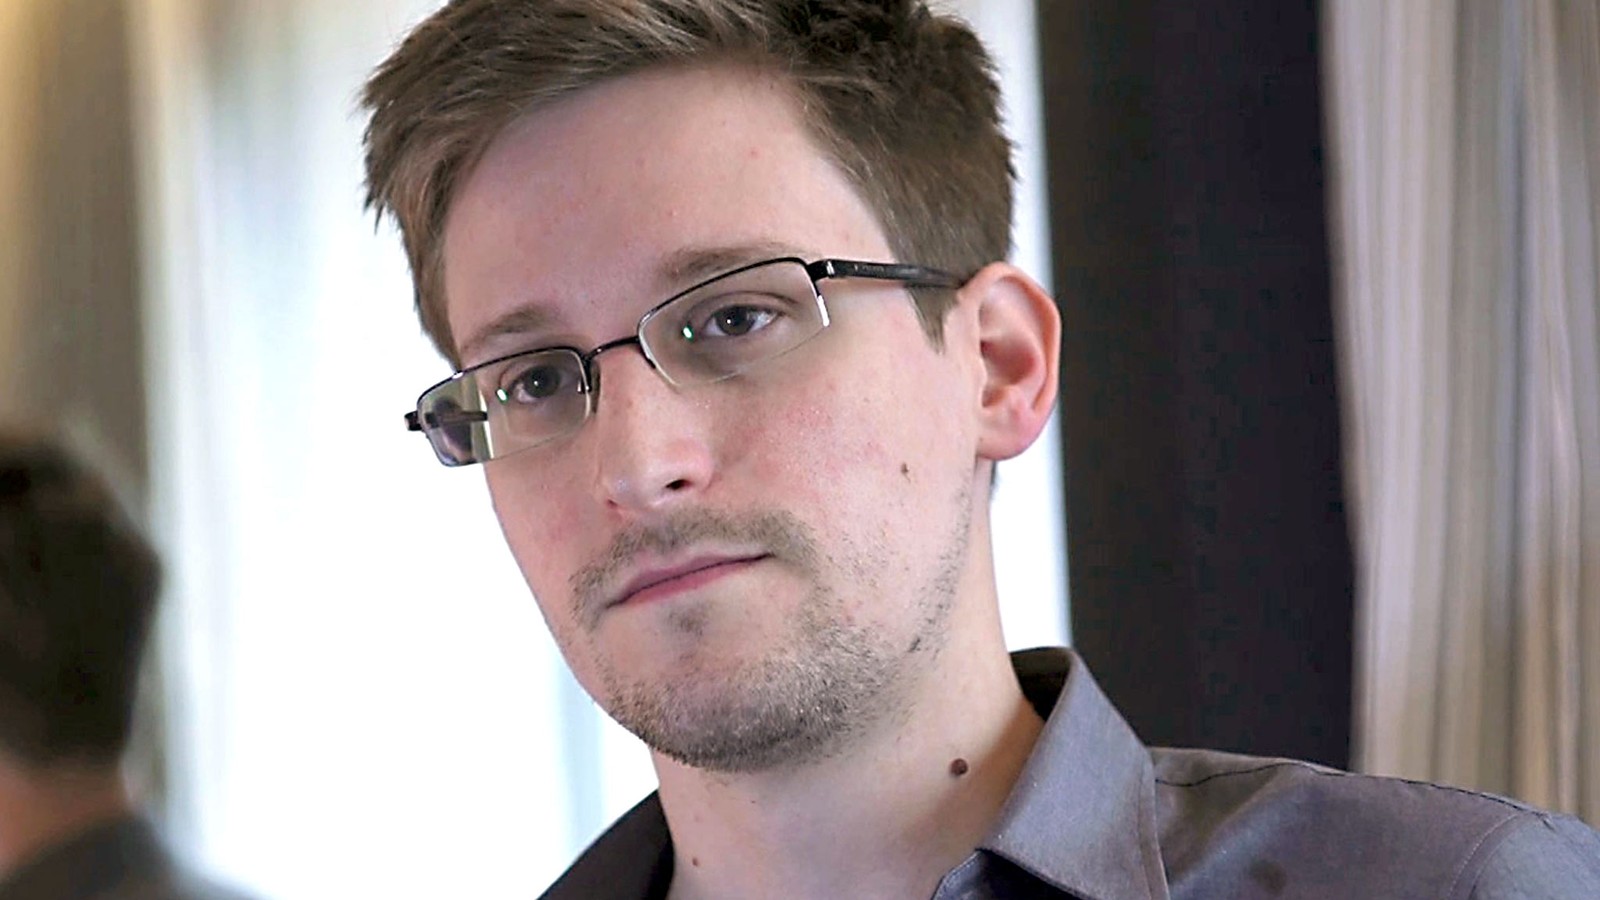 Former U.S. spy agency contractor Edward Snowden is interviewed by The Guardian in his hotel room in Hong Kong&#8230;Former U.S. spy agency contractor Edward Snowden is seen in this still image taken from video during an interview by The Guardian in his hotel room in Hong Kong June 6, 2013. Snowden was on July 24, 2013 granted documents that will allow him to leave a Moscow airport where he is holed up, an airport source said on Wednesday. The official, who spoke on condition of anonymity, said Snowden, who is wanted by the United States for leaking details of U.S. government intelligence programmes, was expected to meet his lawyer at Sheremetyevo airport later on Wednesday after lodging a request for temporary asylum in Russia. The immigration authorities declined immediate comment. Picture taken June 6, 2013. MANDATORY CREDIT. REUTERS/Glenn Greenwald/Laura Poitras/Courtesy of The Guardian/Handout via Reuters  (CHINA &#8211; Tags: POLITICS MEDIA)
ATTENTION EDITORS &#8211; THIS IMAGE WAS PROVIDED BY A THIRD PARTY. FOR EDITORIAL USE ONLY. NOT FOR SALE FOR MARKETING OR ADVERTISING CAMPAIGNS. NO SALES. NO ARCHIVES. THIS PICTURE IS DISTRIBUTED EXACTLY AS RECEIVED BY REUTERS, AS A SERVICE TO CLIENTS. NO THIRD PARTY SALES. NOT FOR USE BY REUTERS THIRD PARTY DISTRIBUTORS. MANDATORY CREDIT
